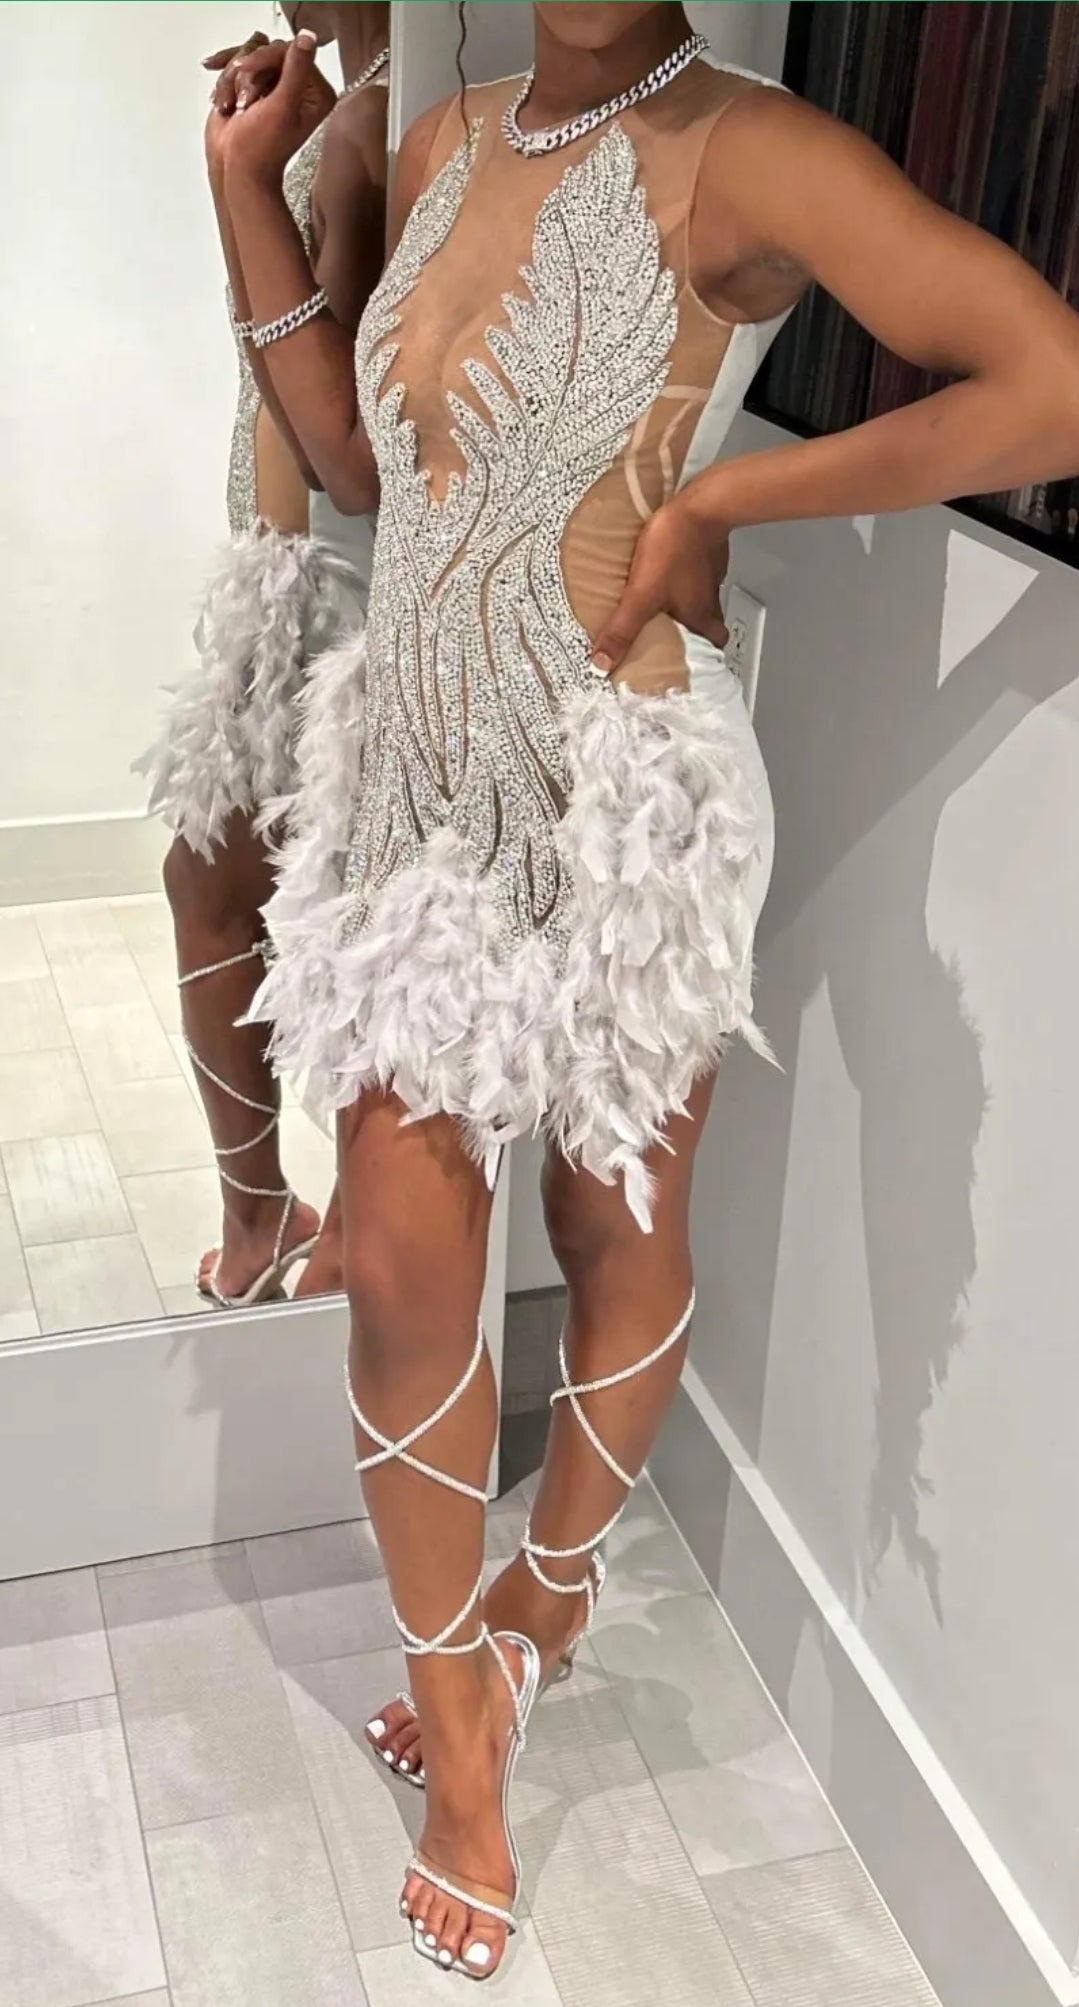 Luxury Sheer Cocktail Feather Dress Fashion Closet Clothing